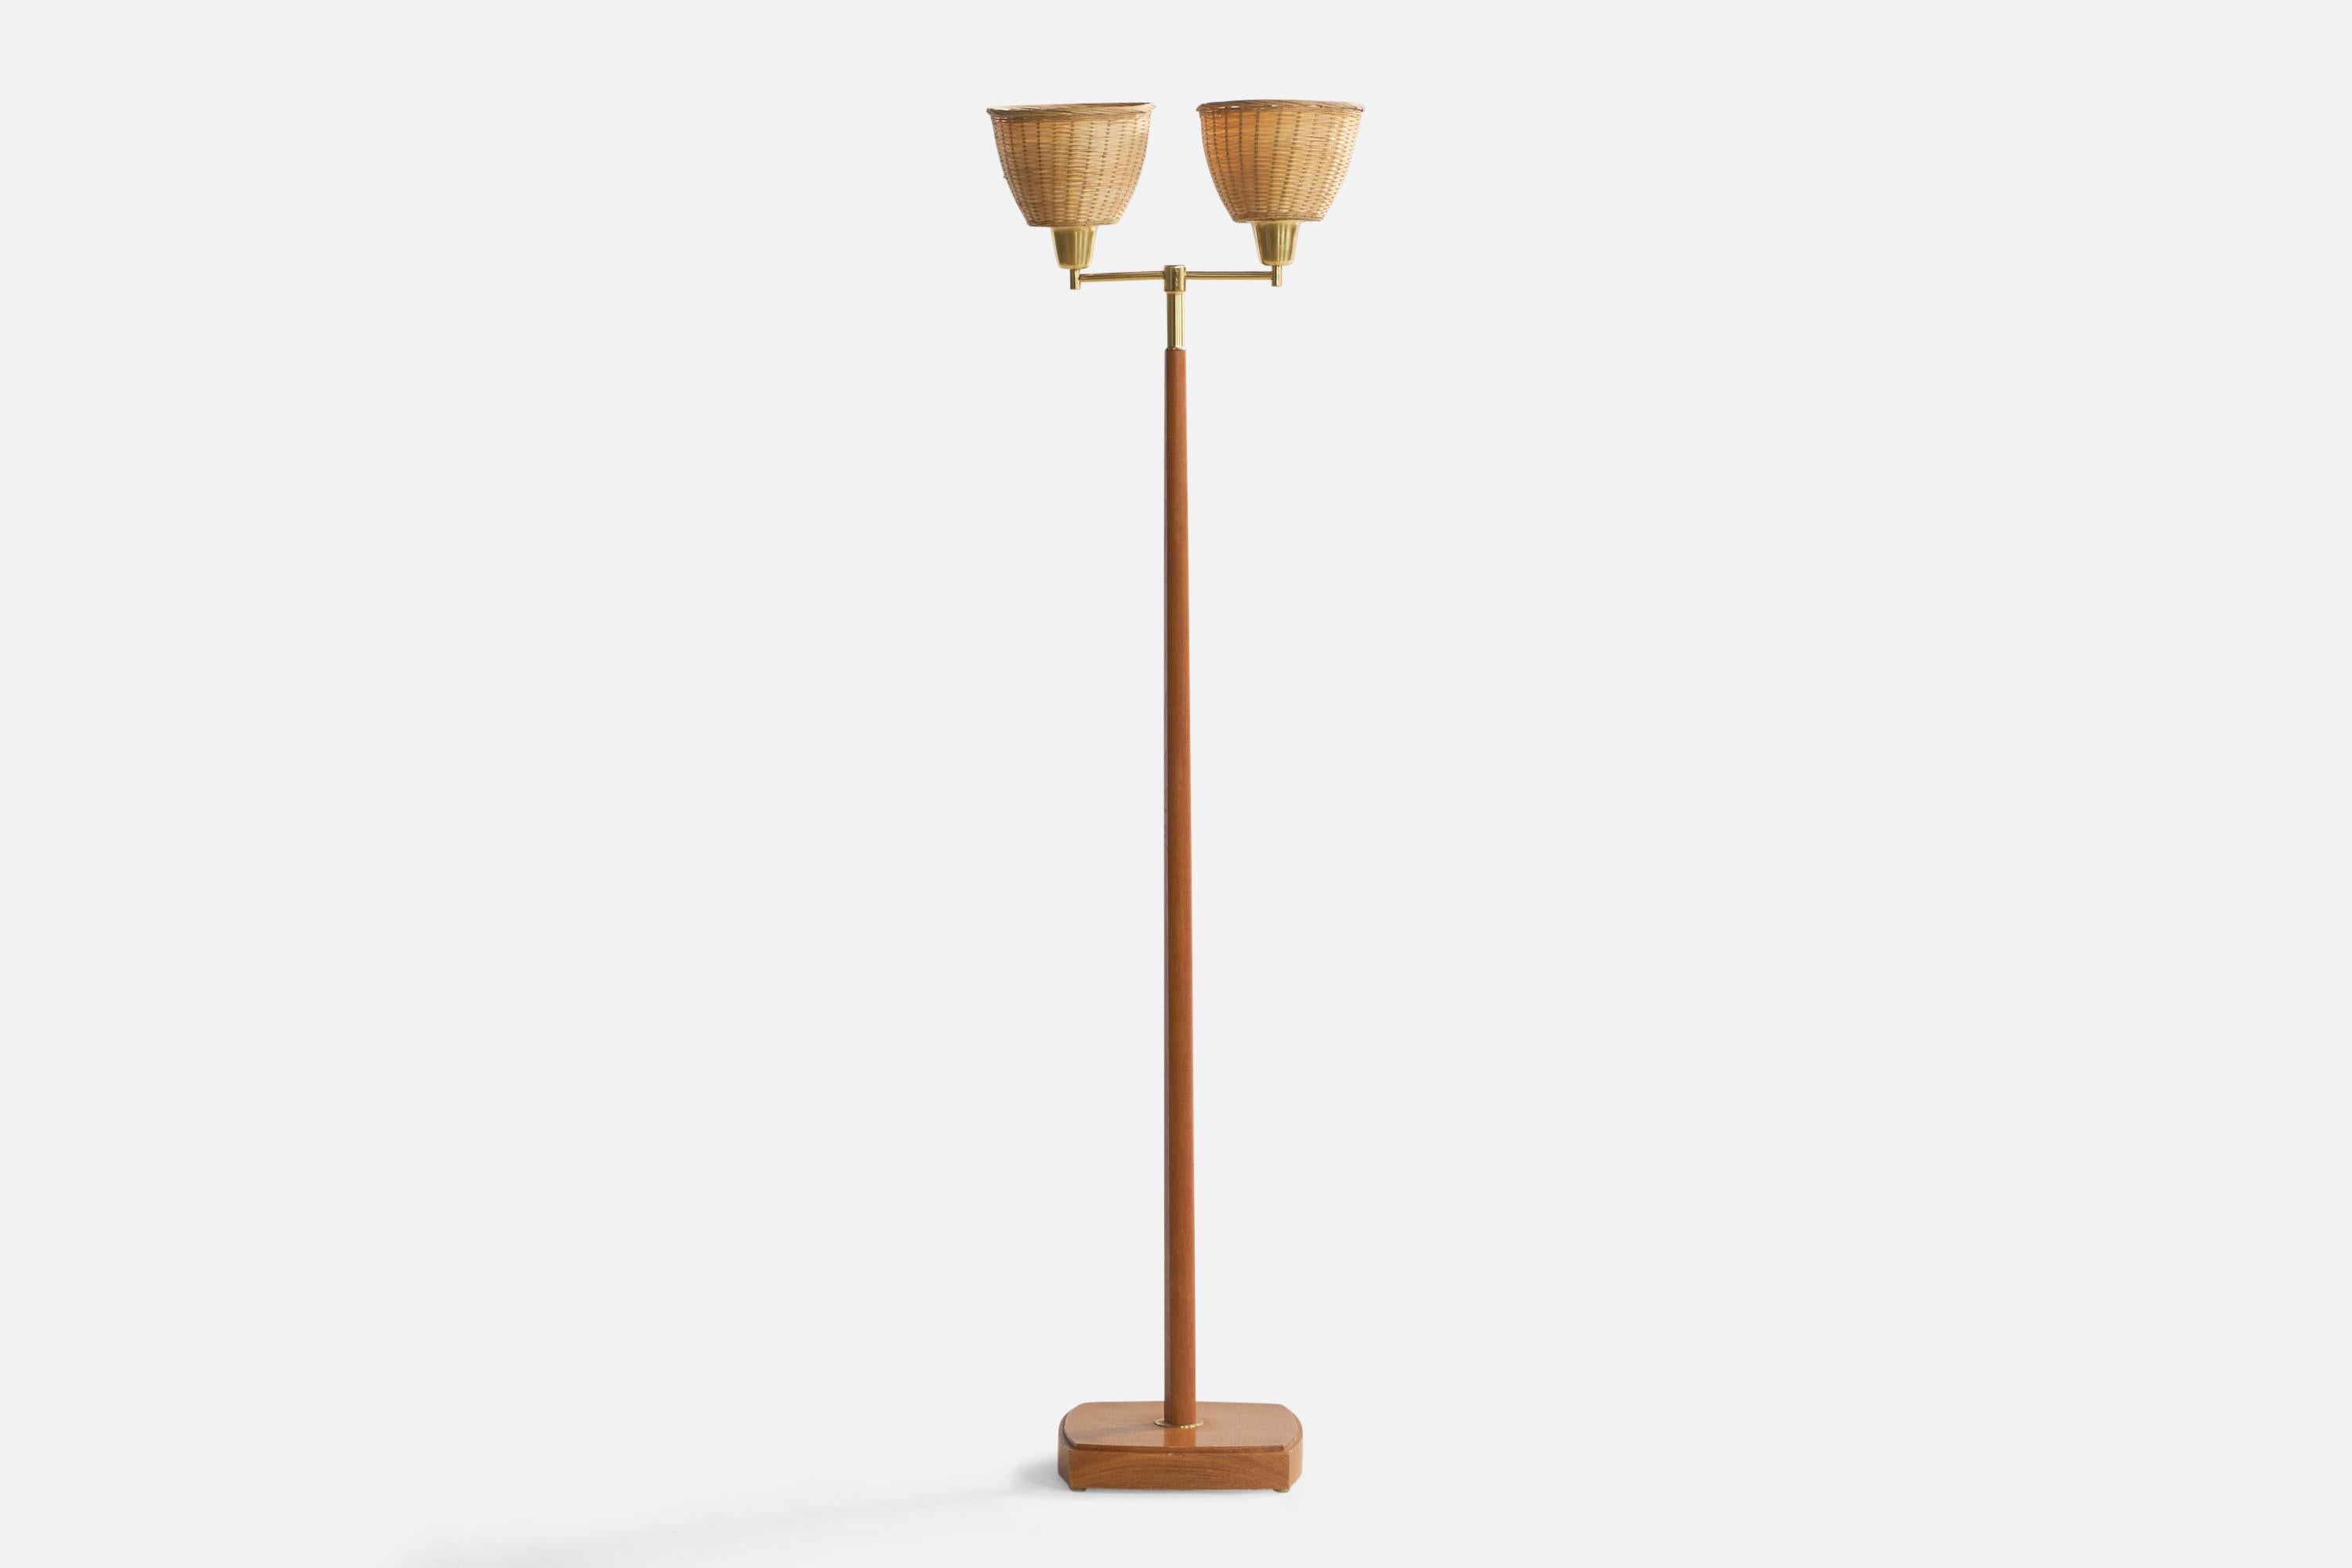 A two-armed brass, teak and rattan floor lamp designed and produced in Sweden, c. 1950s.

Overall Dimensions (inches): 54.8” H x 15” W x 10.25” D
Bulb Specifications: E-26 Bulbs
Number of Sockets: 2
All lighting will be converted for US usage. We